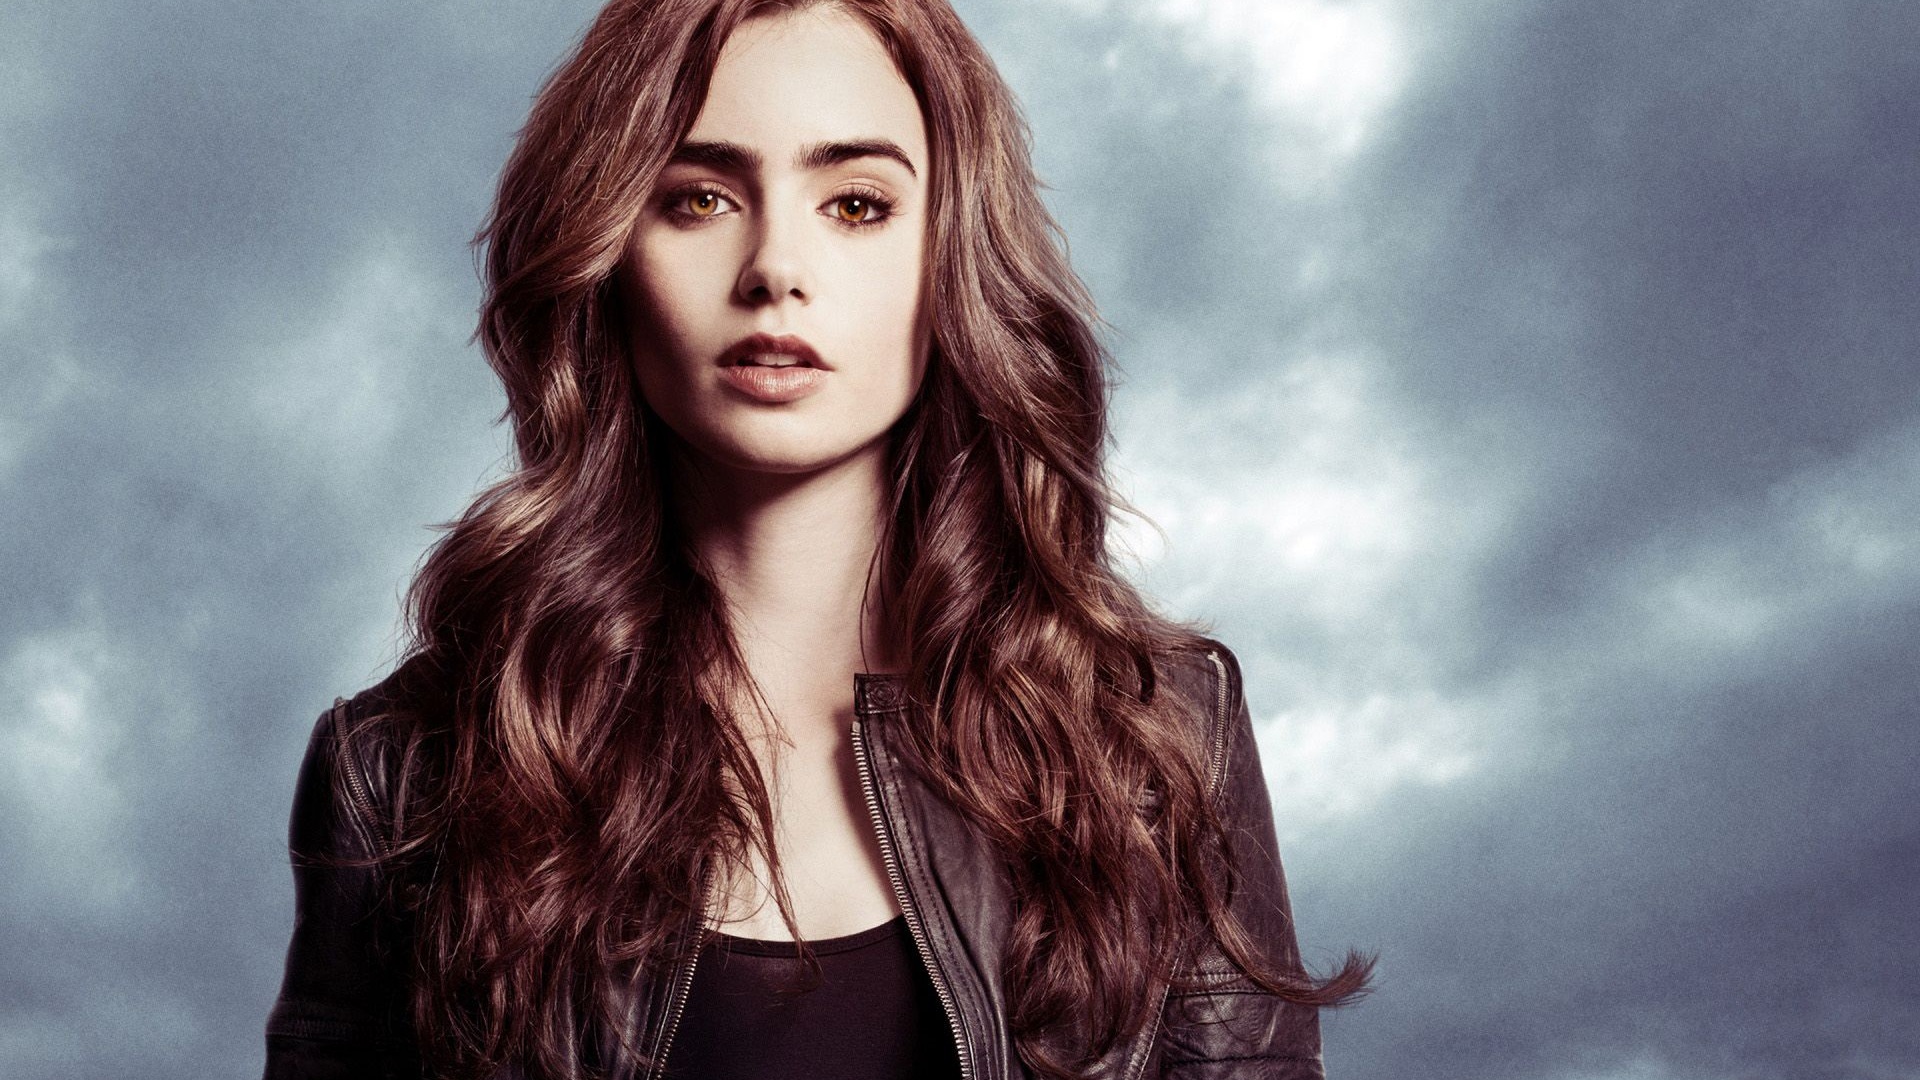 Lily Collins beautiful wallpapers #18 - 1920x1080